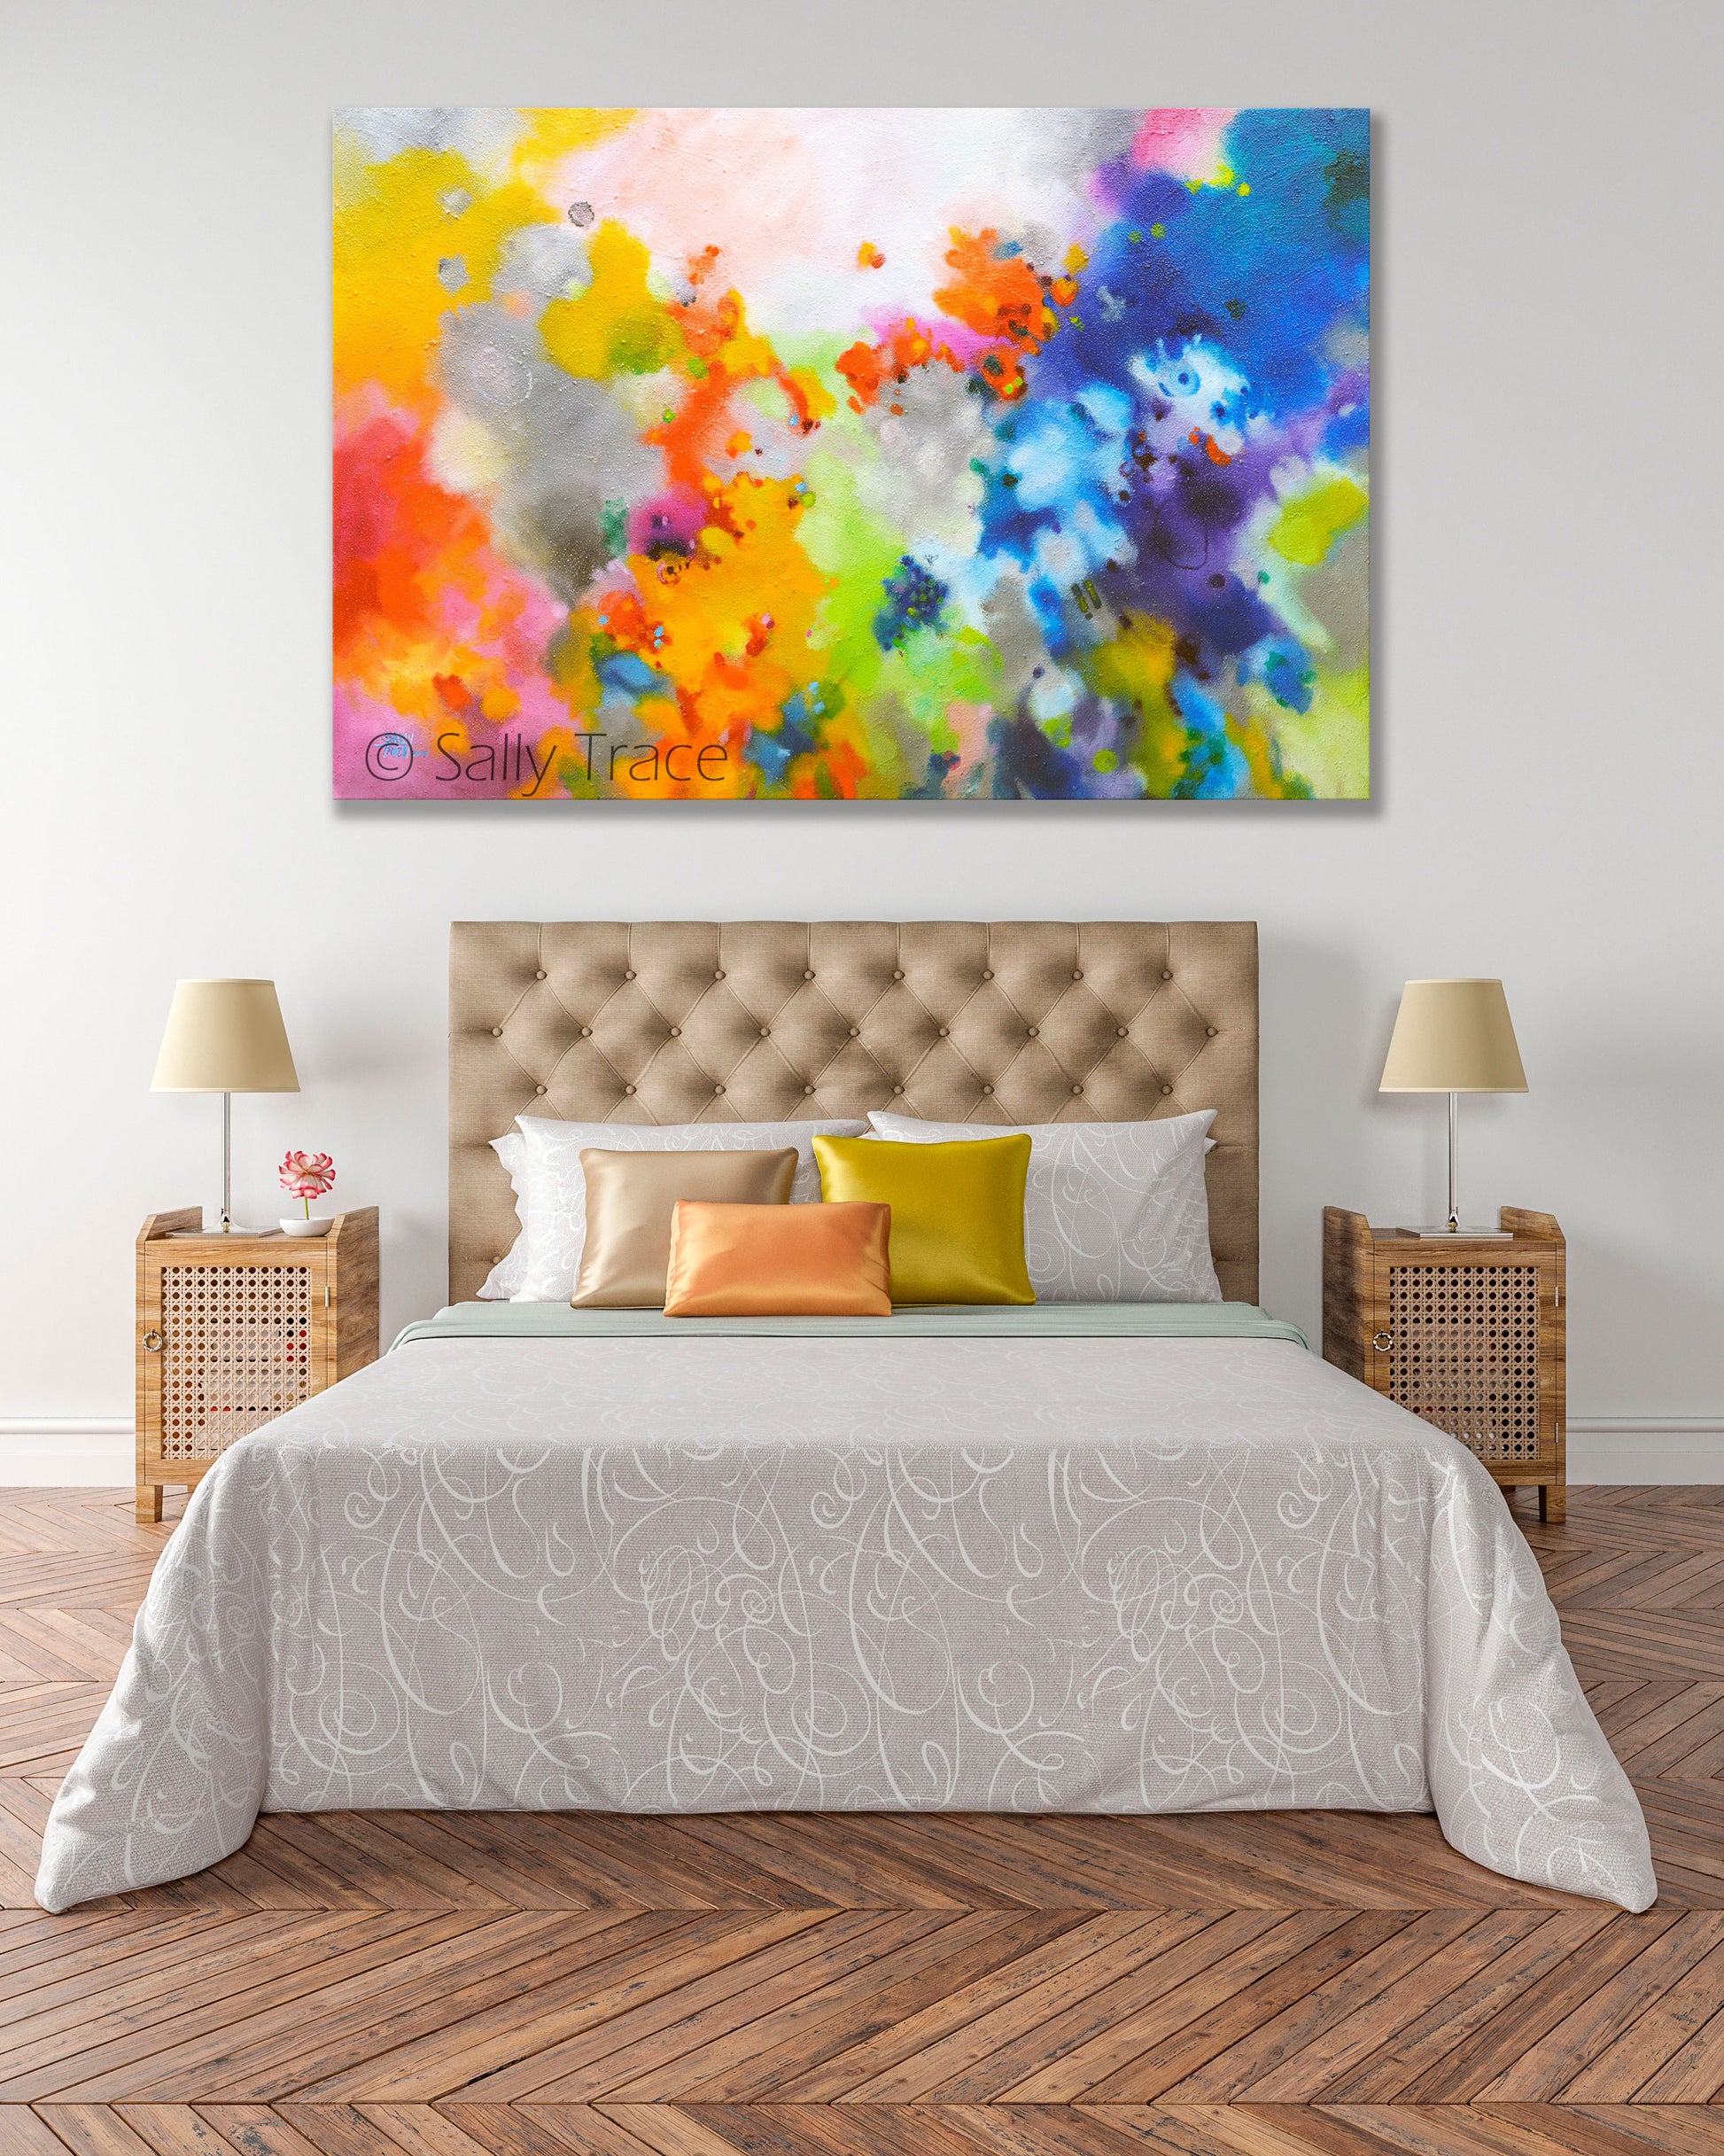 Giclee print by Sally Trace from the original painting Point of View, shown hanging above a bed, as contemporary bedroom decor and wall art for the bedroom